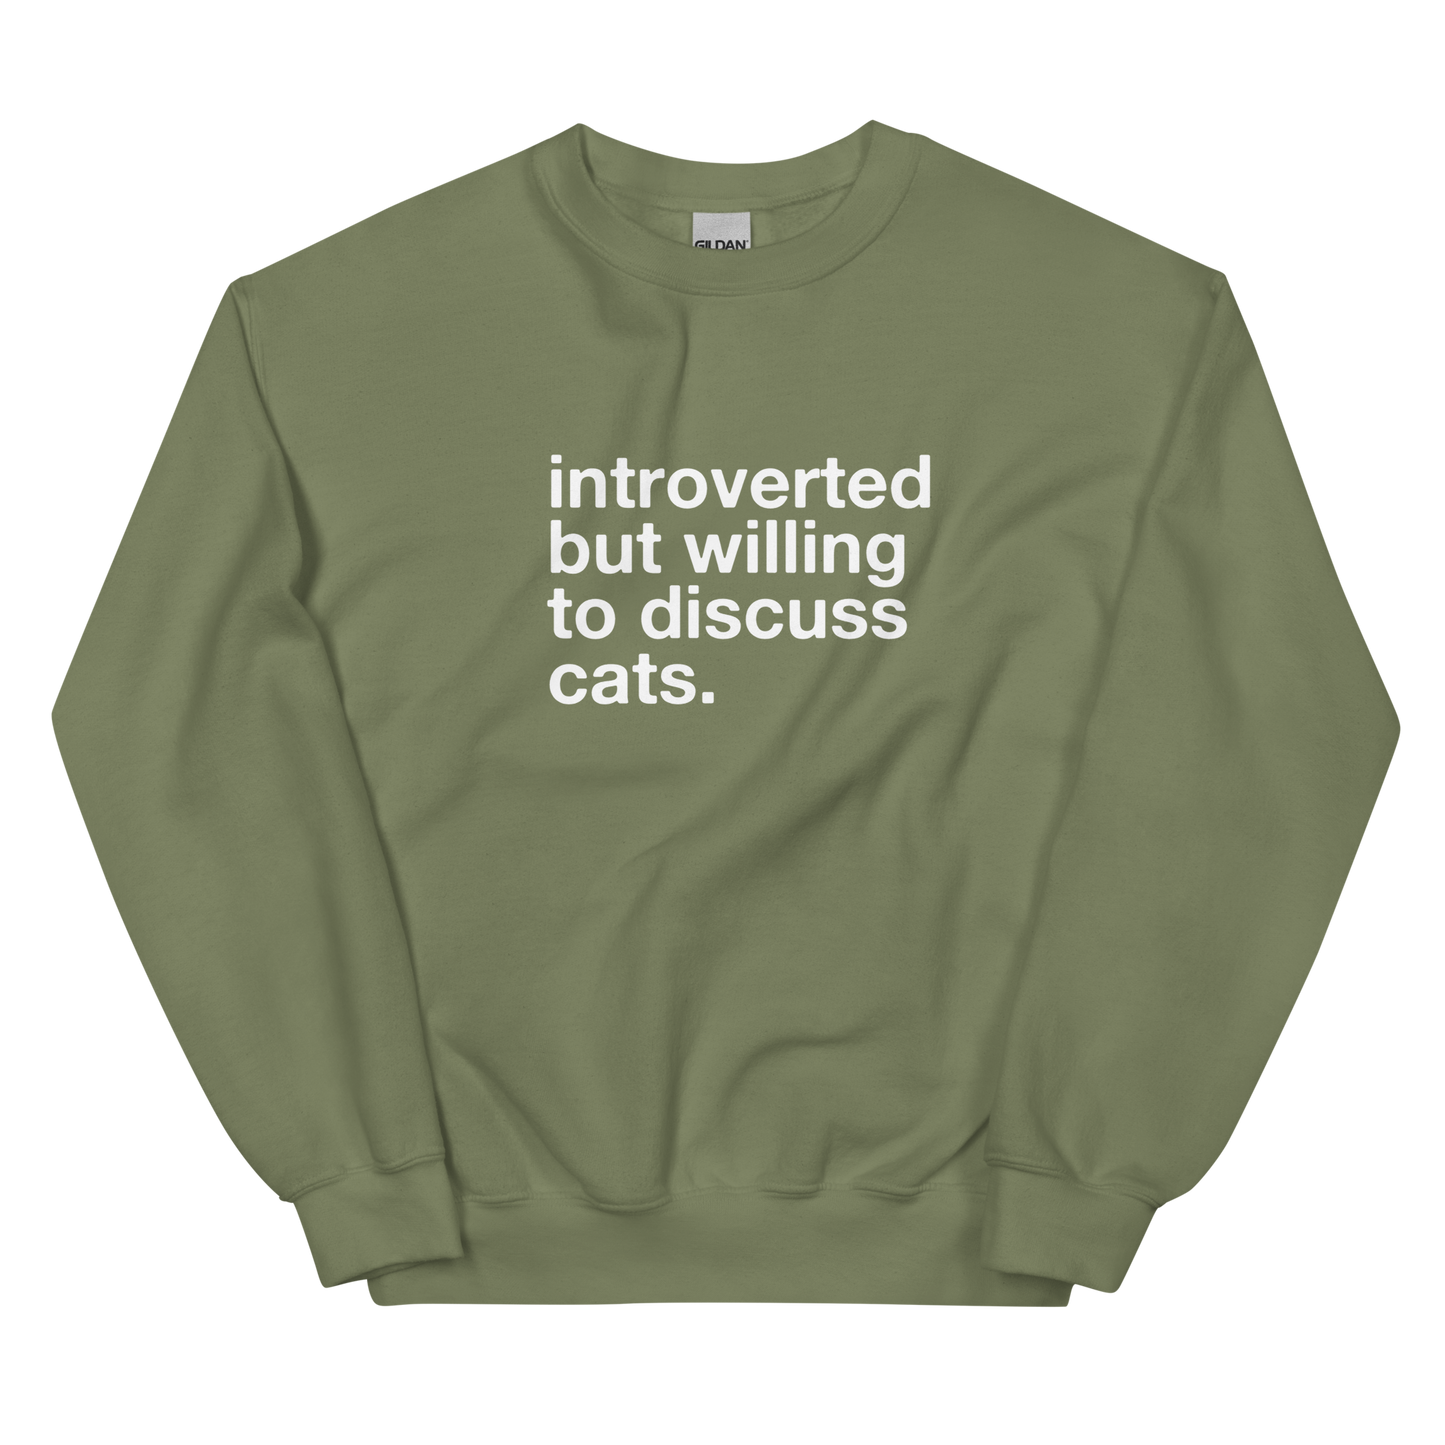 introverted but willing to discuss cats. - Unisex Crewneck Sweatshirt